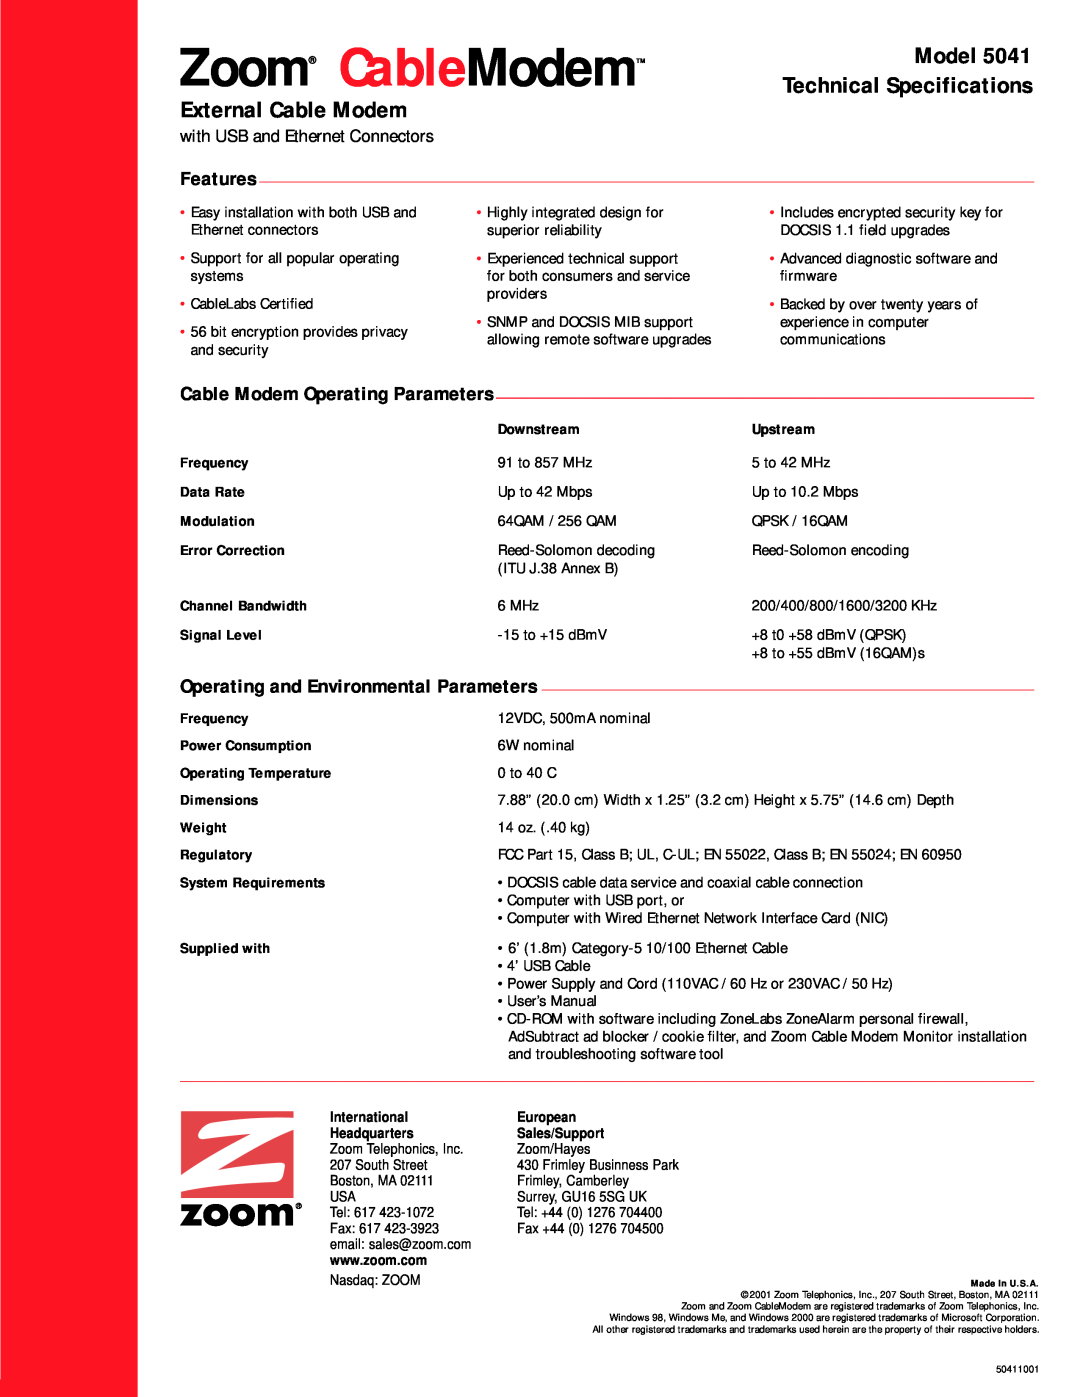 Zoom 5041 user manual Features, Cable Modem Operating Parameters, Zoom CableModem, Model, Technical Specifications 